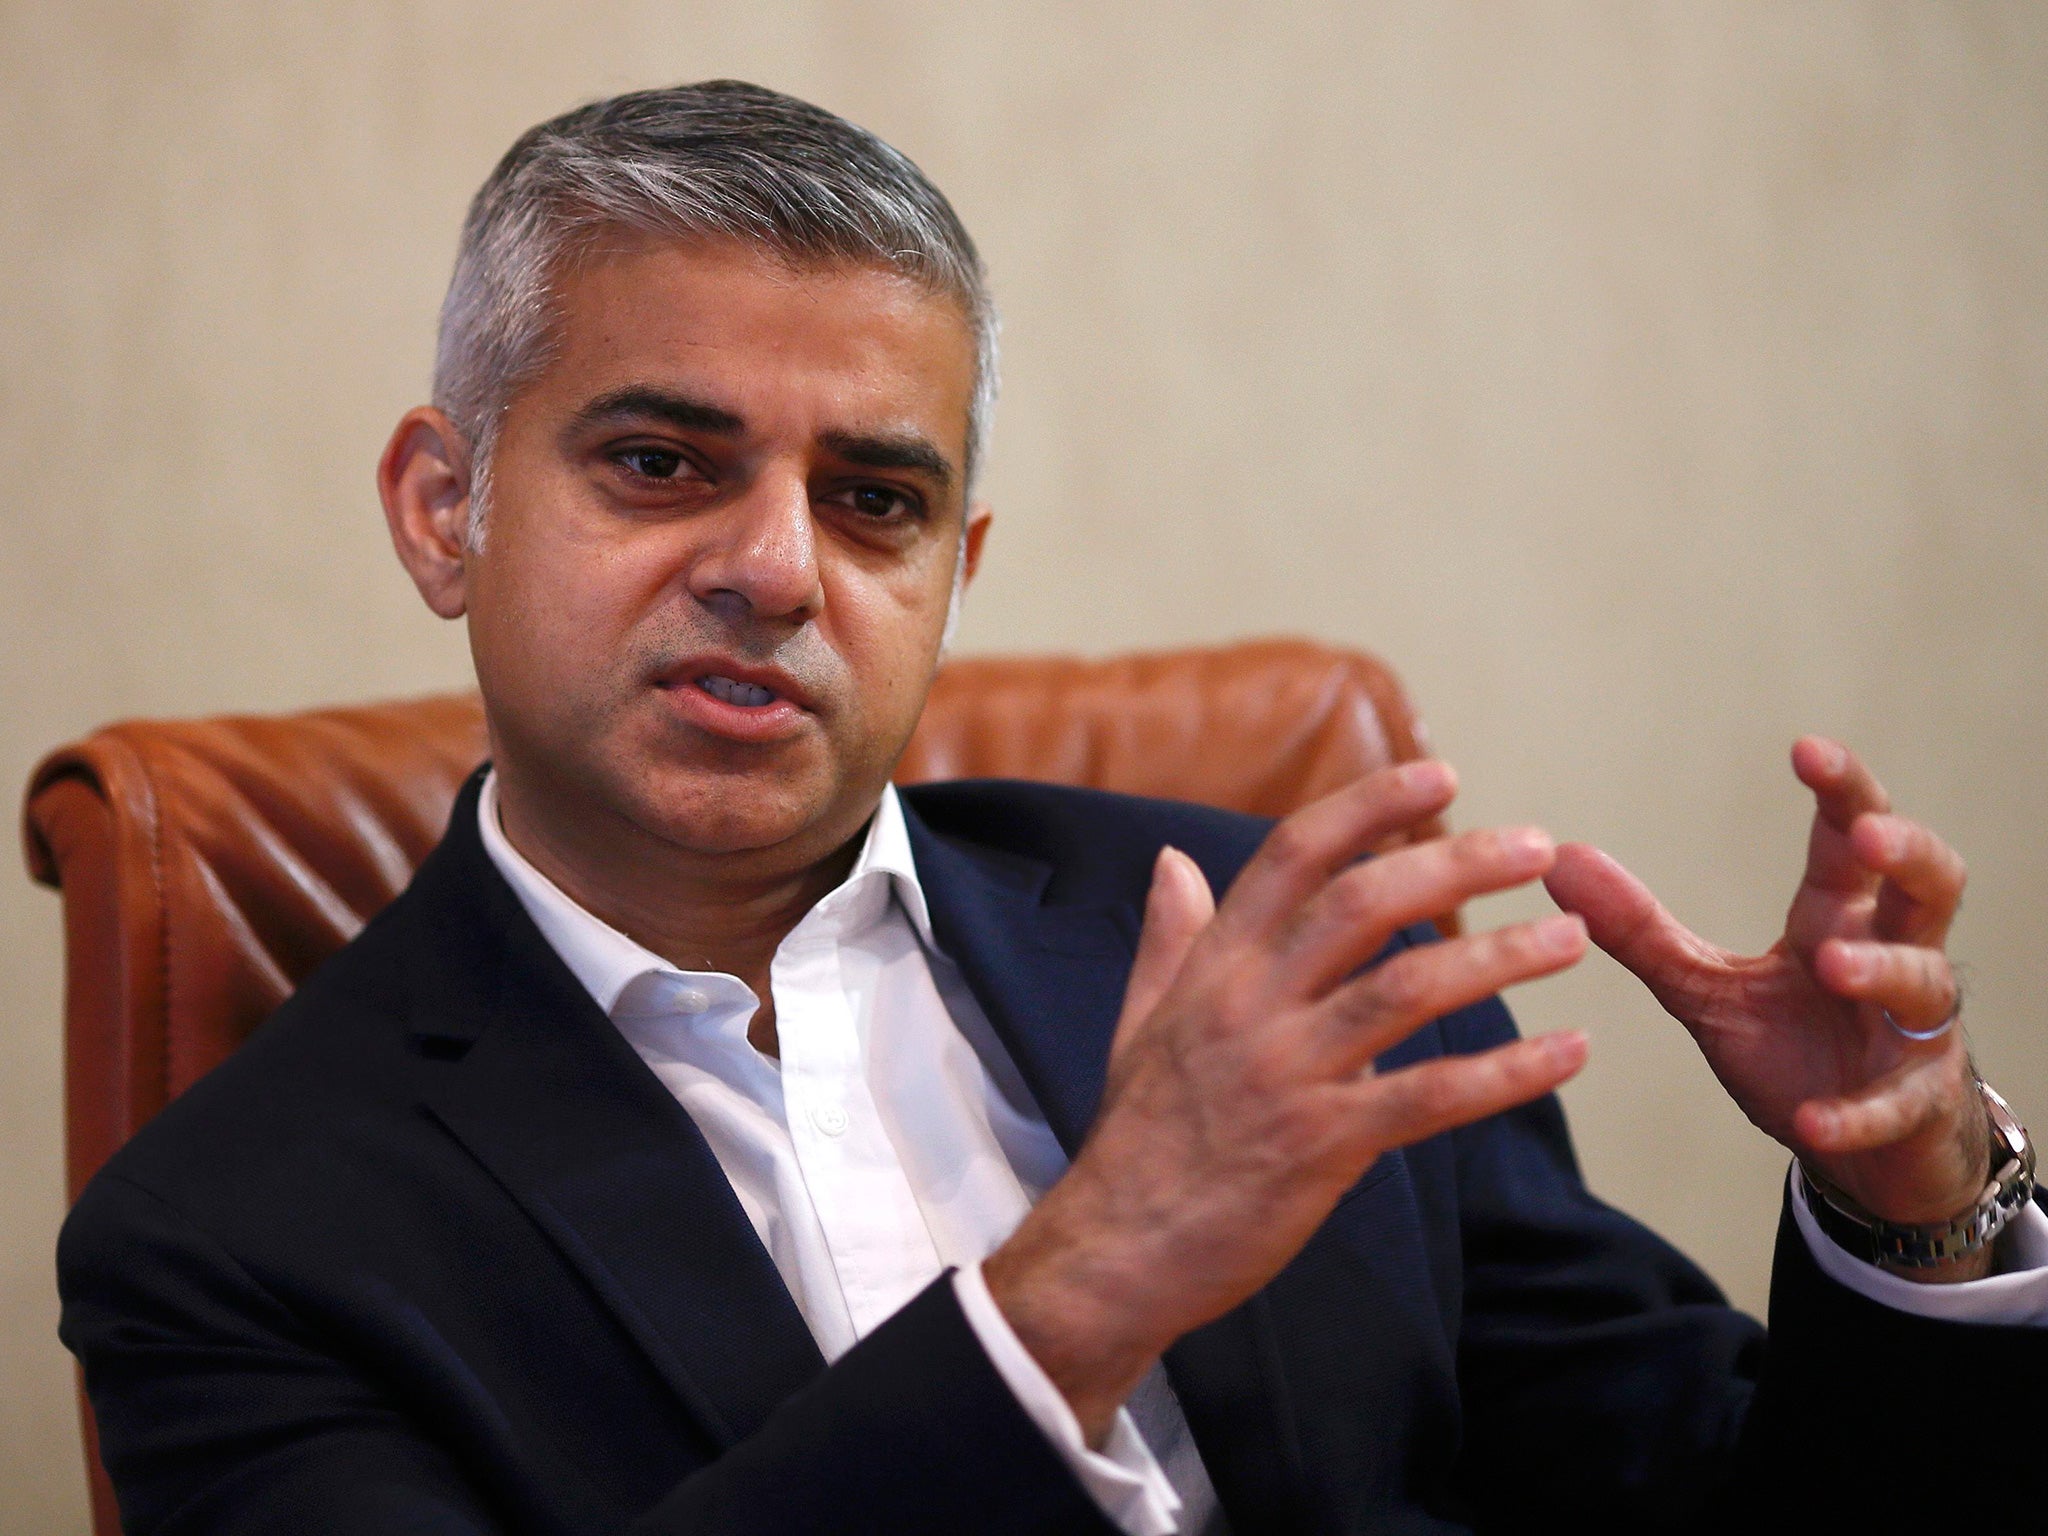 Sadiq Khan, Labour’s London Mayoral candidate, has said he fears his daughters 'could be groomed by extremists on the internet or tricked into running off to Syria'